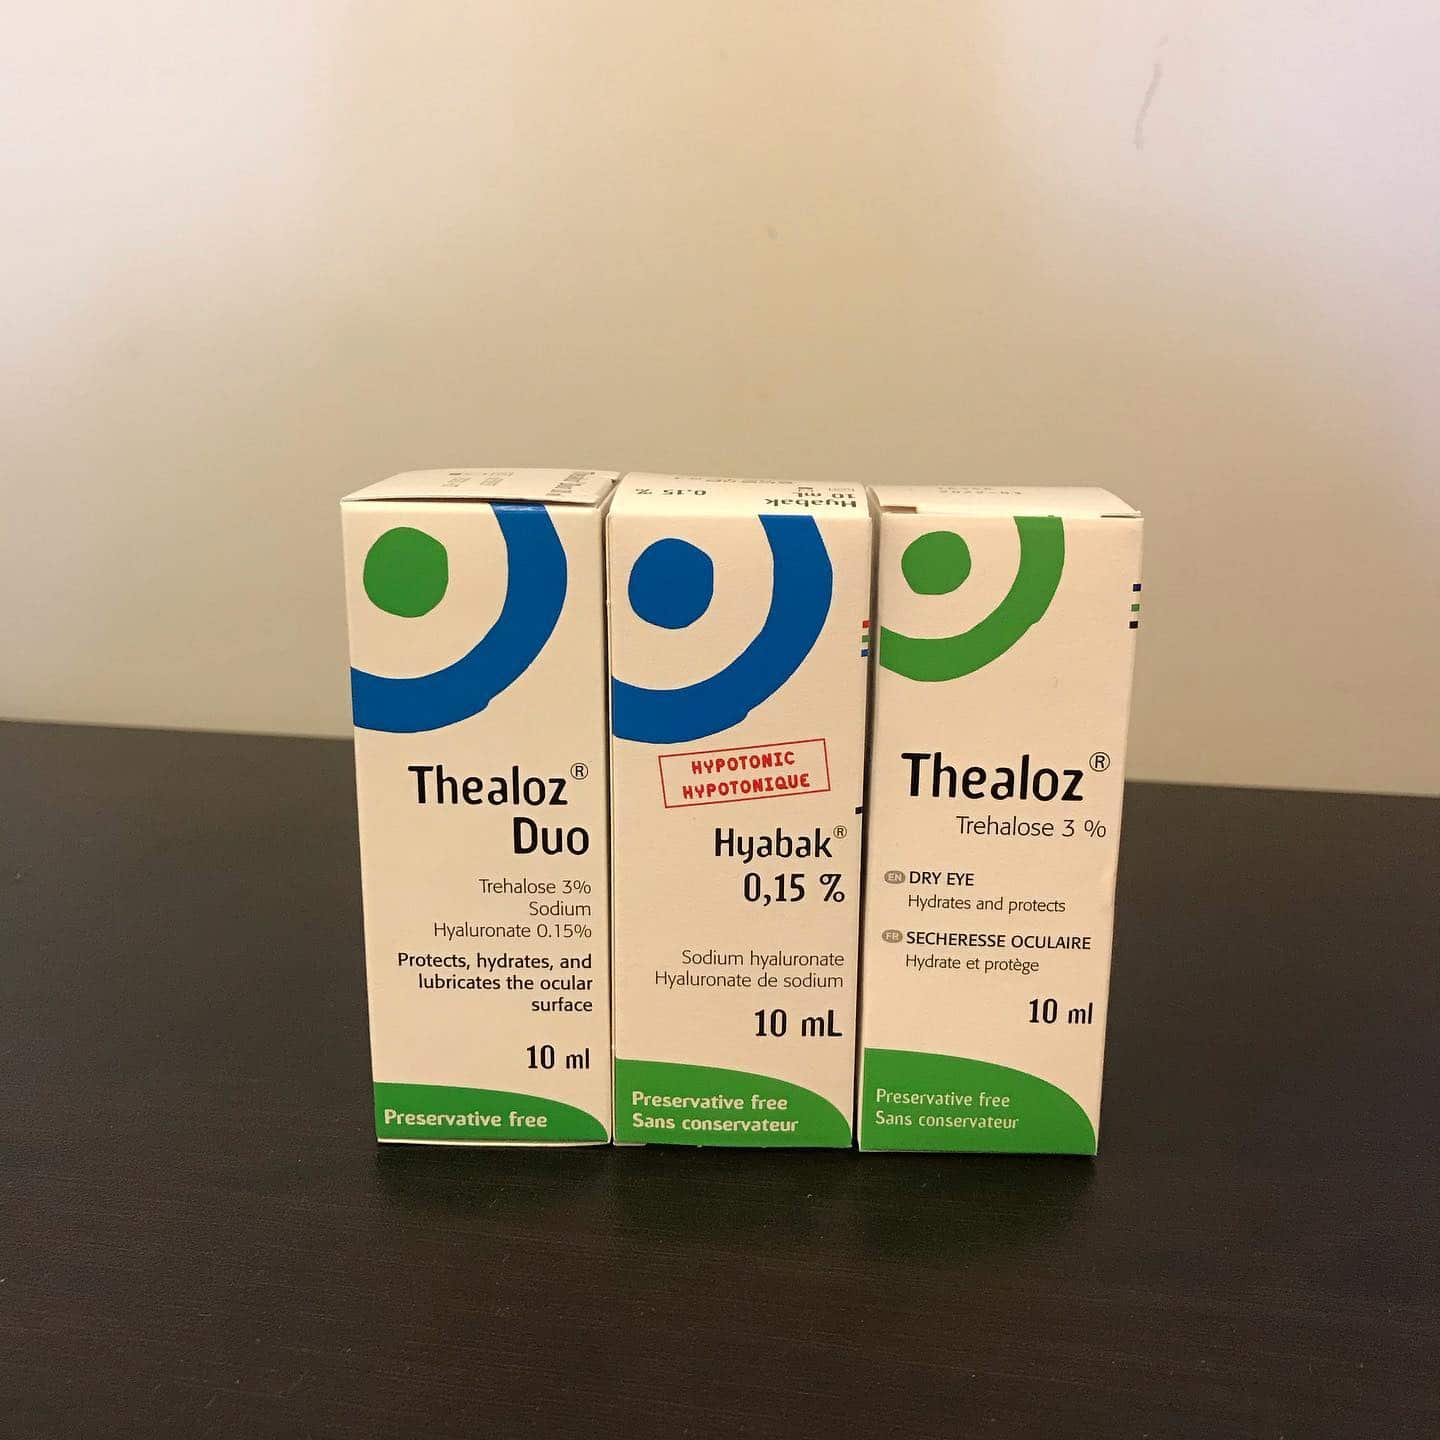 A lot of people suffer from dry eyes, especially during the cold winter months. We have many different options from eye drops to compresses to help keep eyes lubricated and moist to ease the discomfort that dry eyes can cause. Don’t hesitate to ask us about them when you’re in for your eye exam! #eyepractice #rockwoodoptometrist #guelphoptometrist #rockwoodoptometry #guelphoptometry #eyeexam #dryeyes